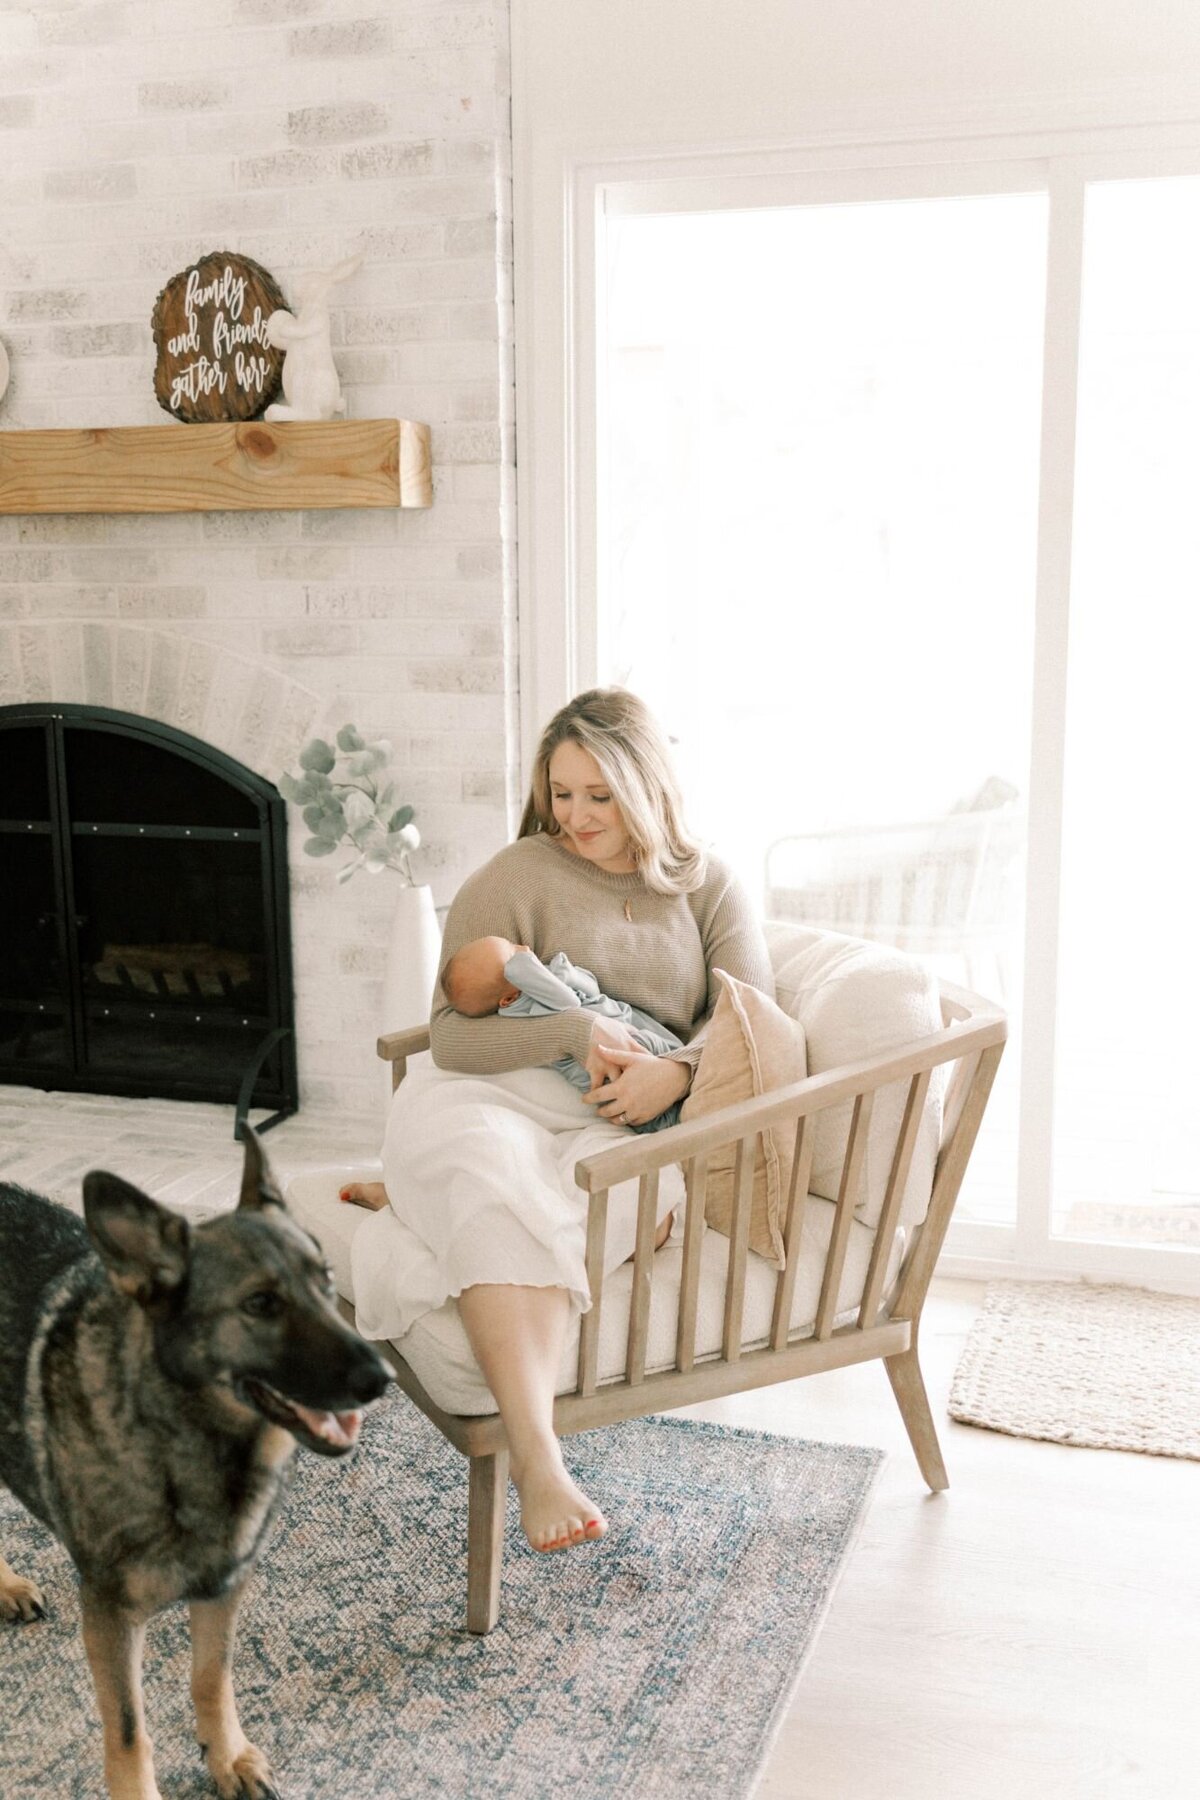 Woman sits on chair with baby and dog standing nearby.